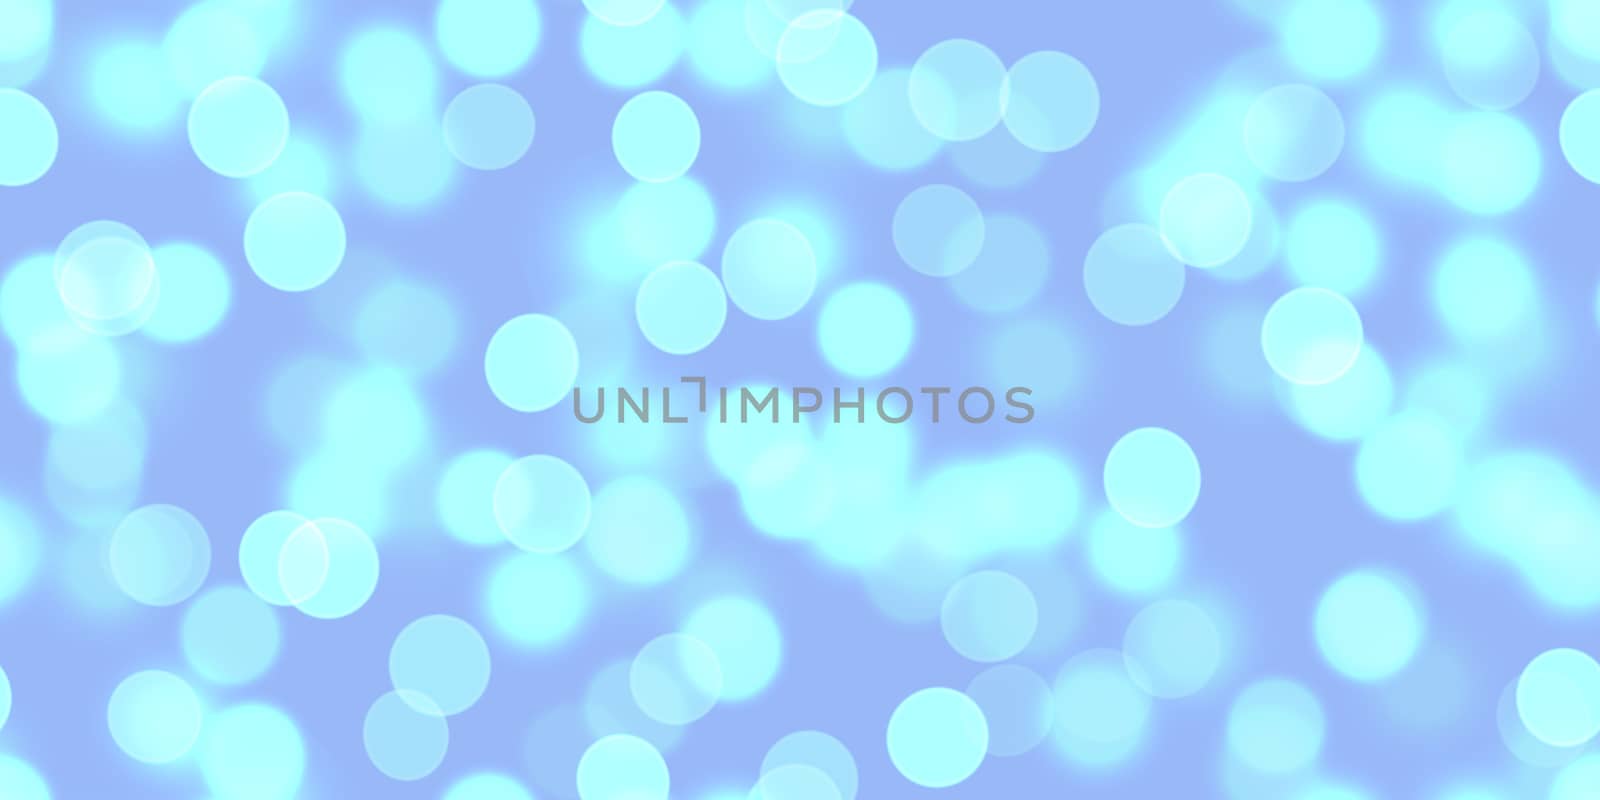 Light Blue Bright Bokeh Background. Glowing Lights Texture. Shine Celebration Backdrop. by sanches812